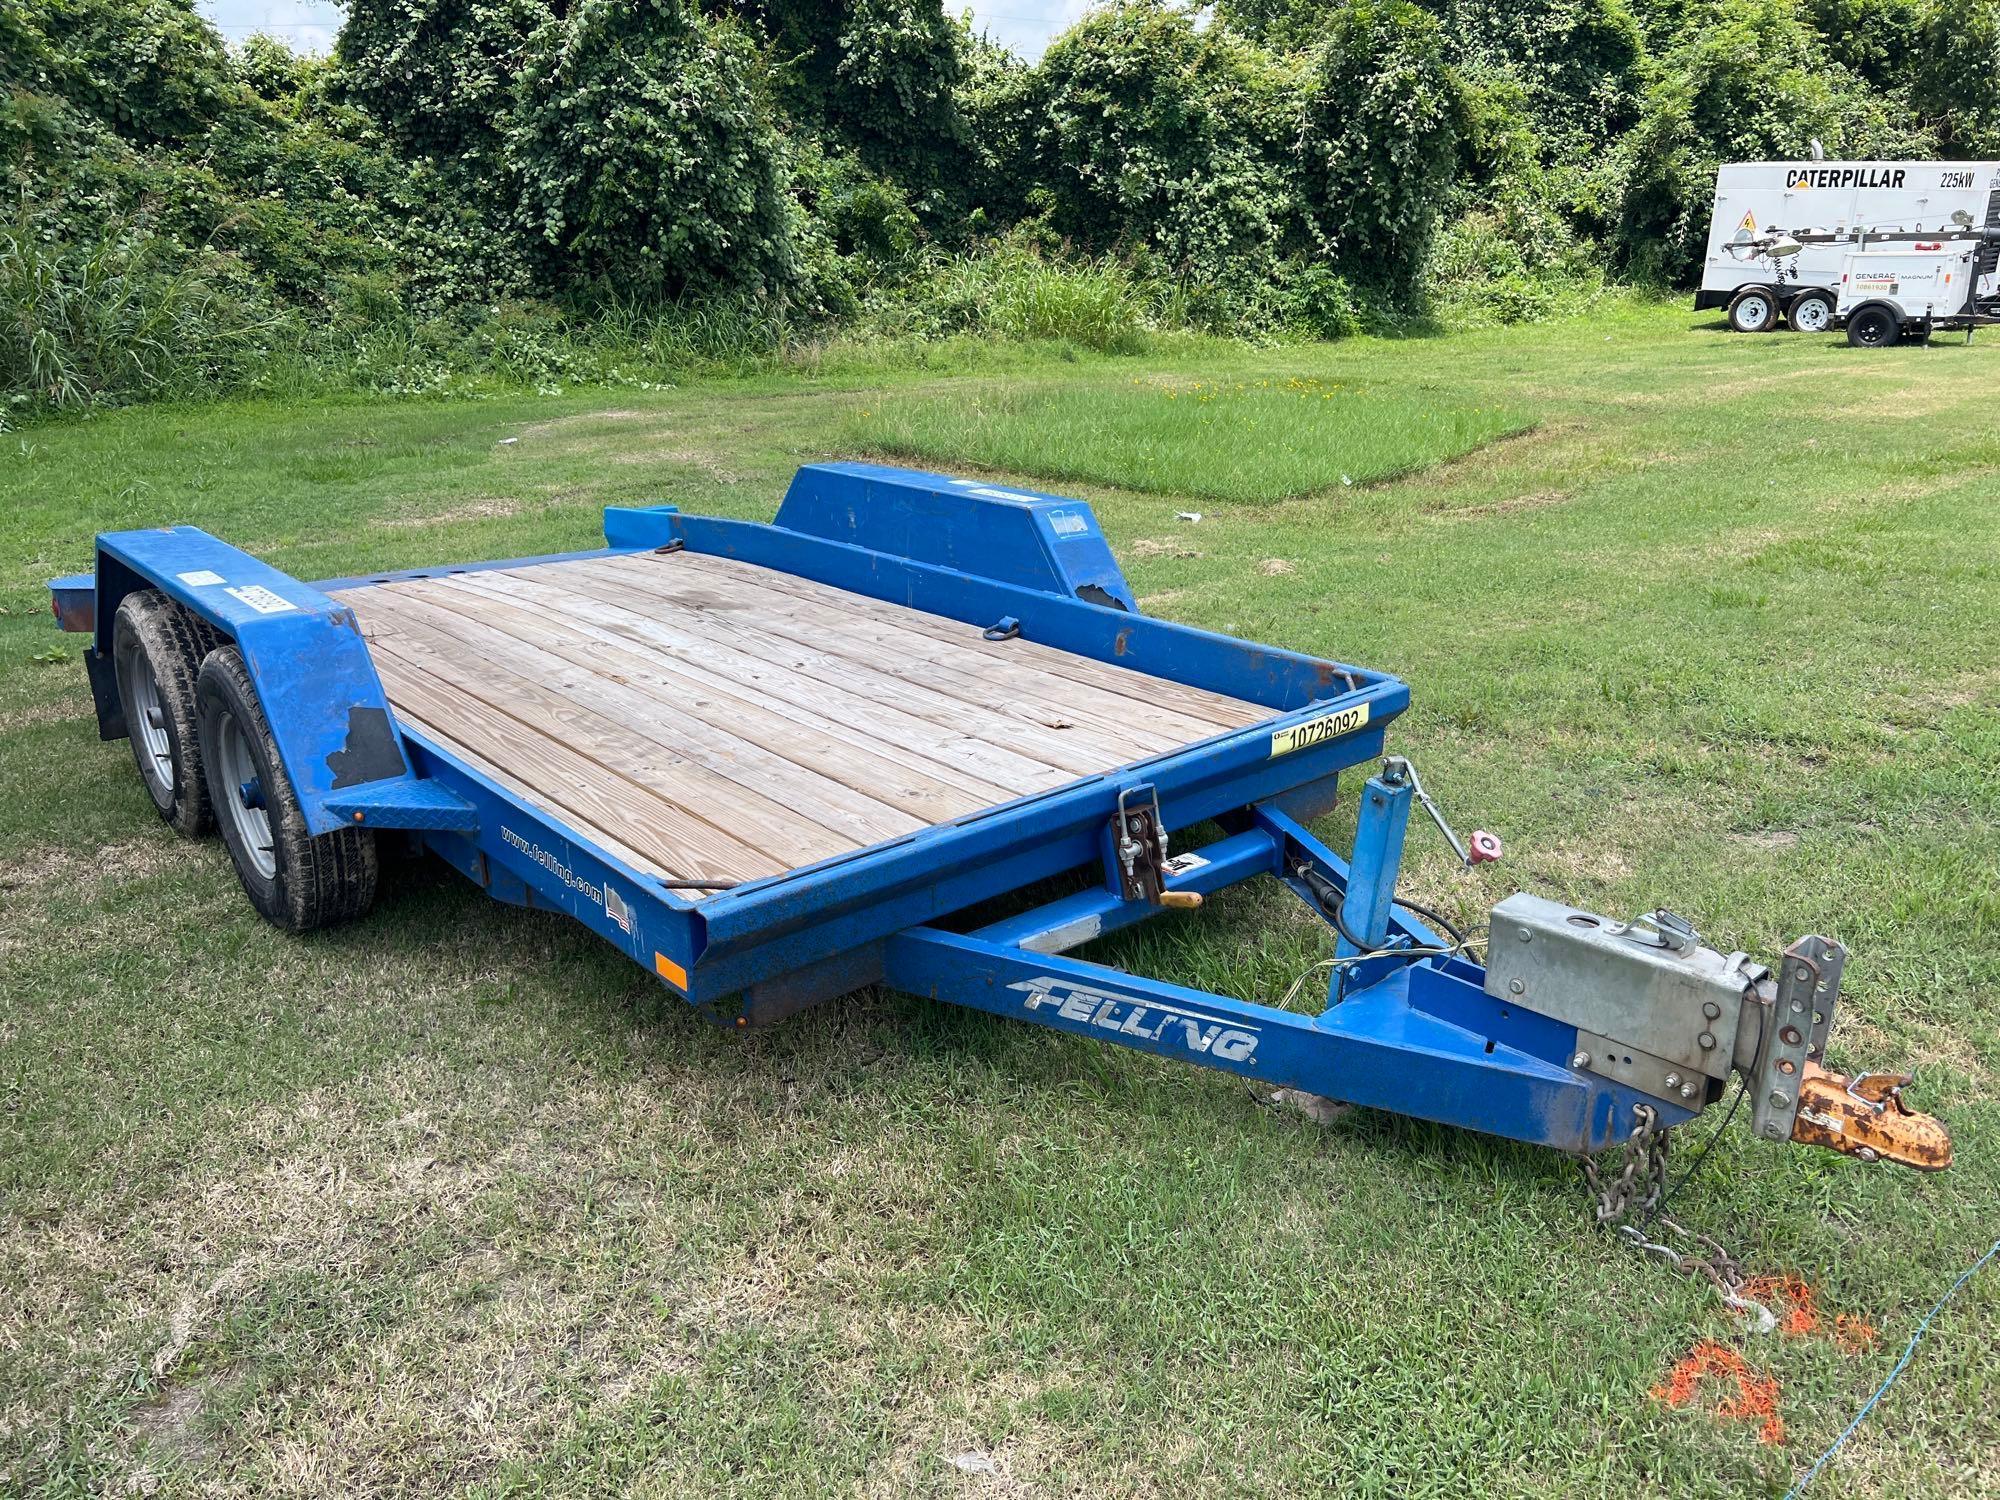 2018 FELLING FT-10 T-W TAGALONG TRAILER VN:5FTBE1924J1005174 equipped with 12ft. Tilt deck, tandem